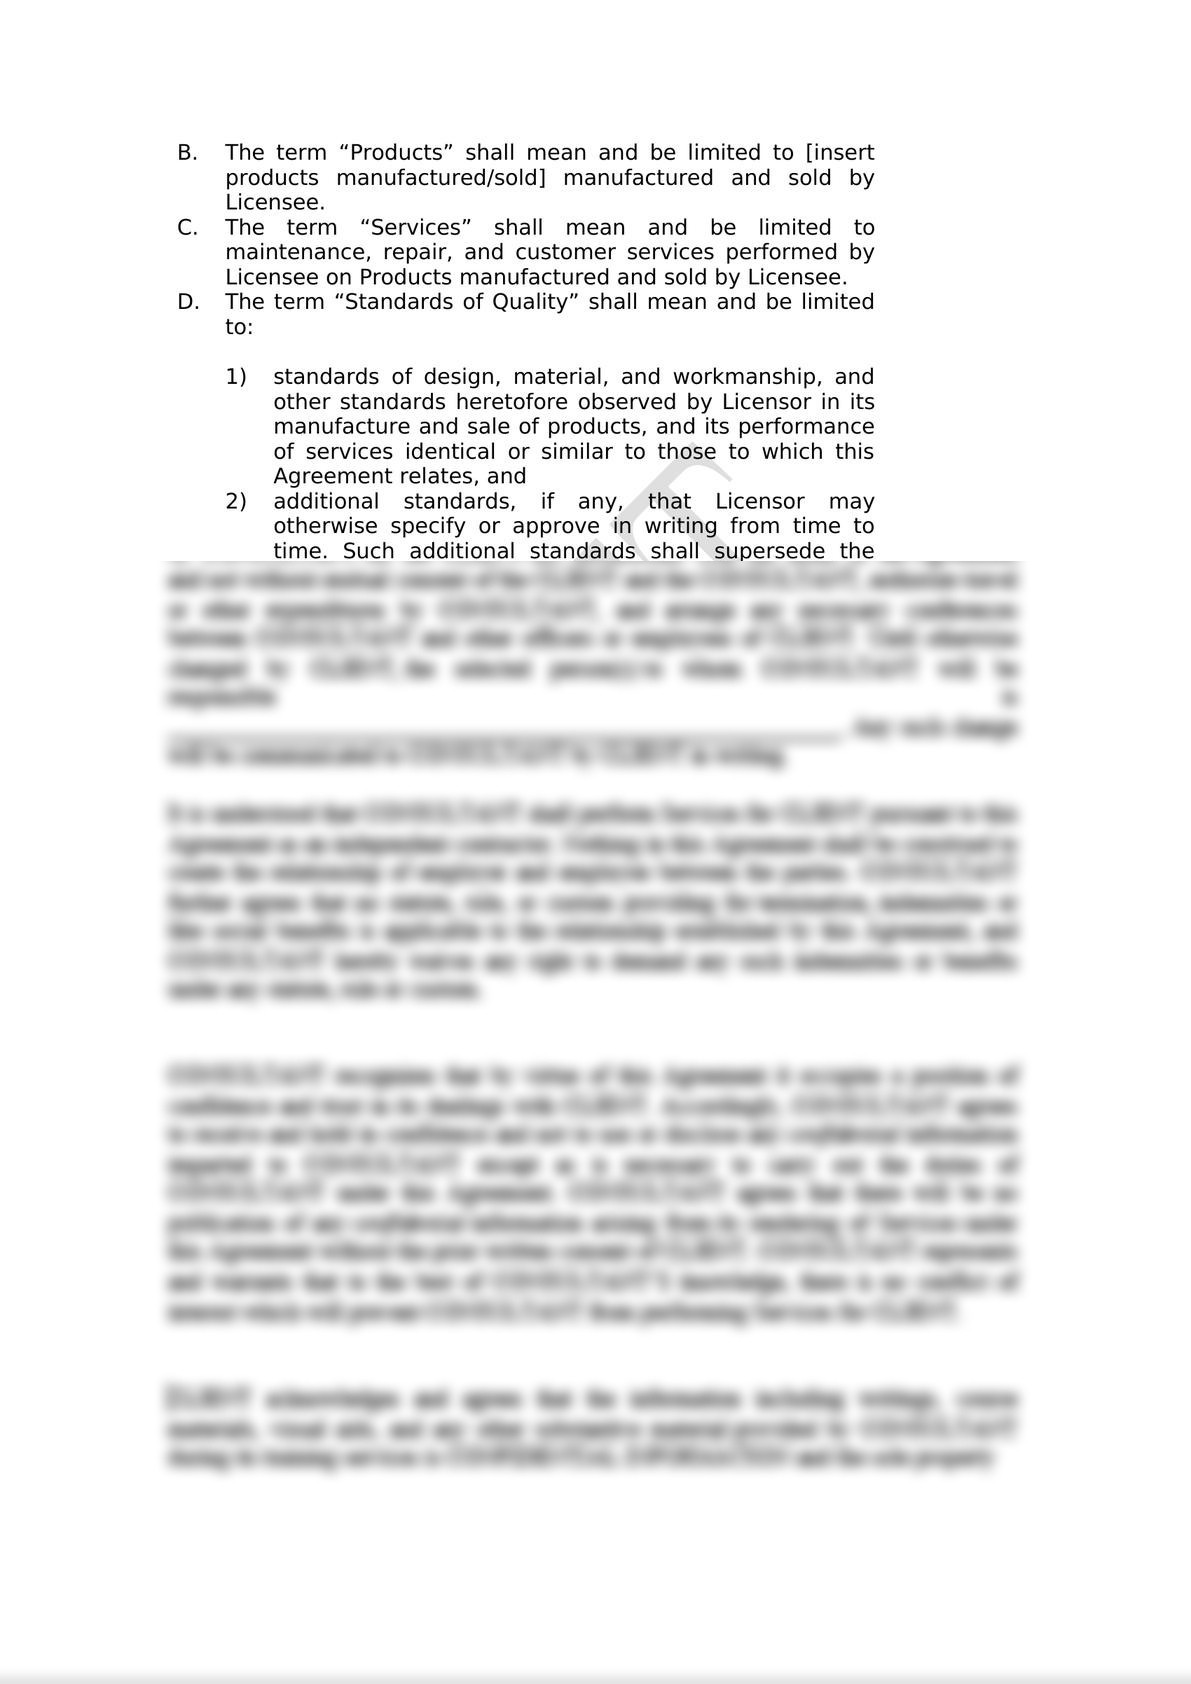 Inter-Company Intellectual Property Licensing Agreement-1